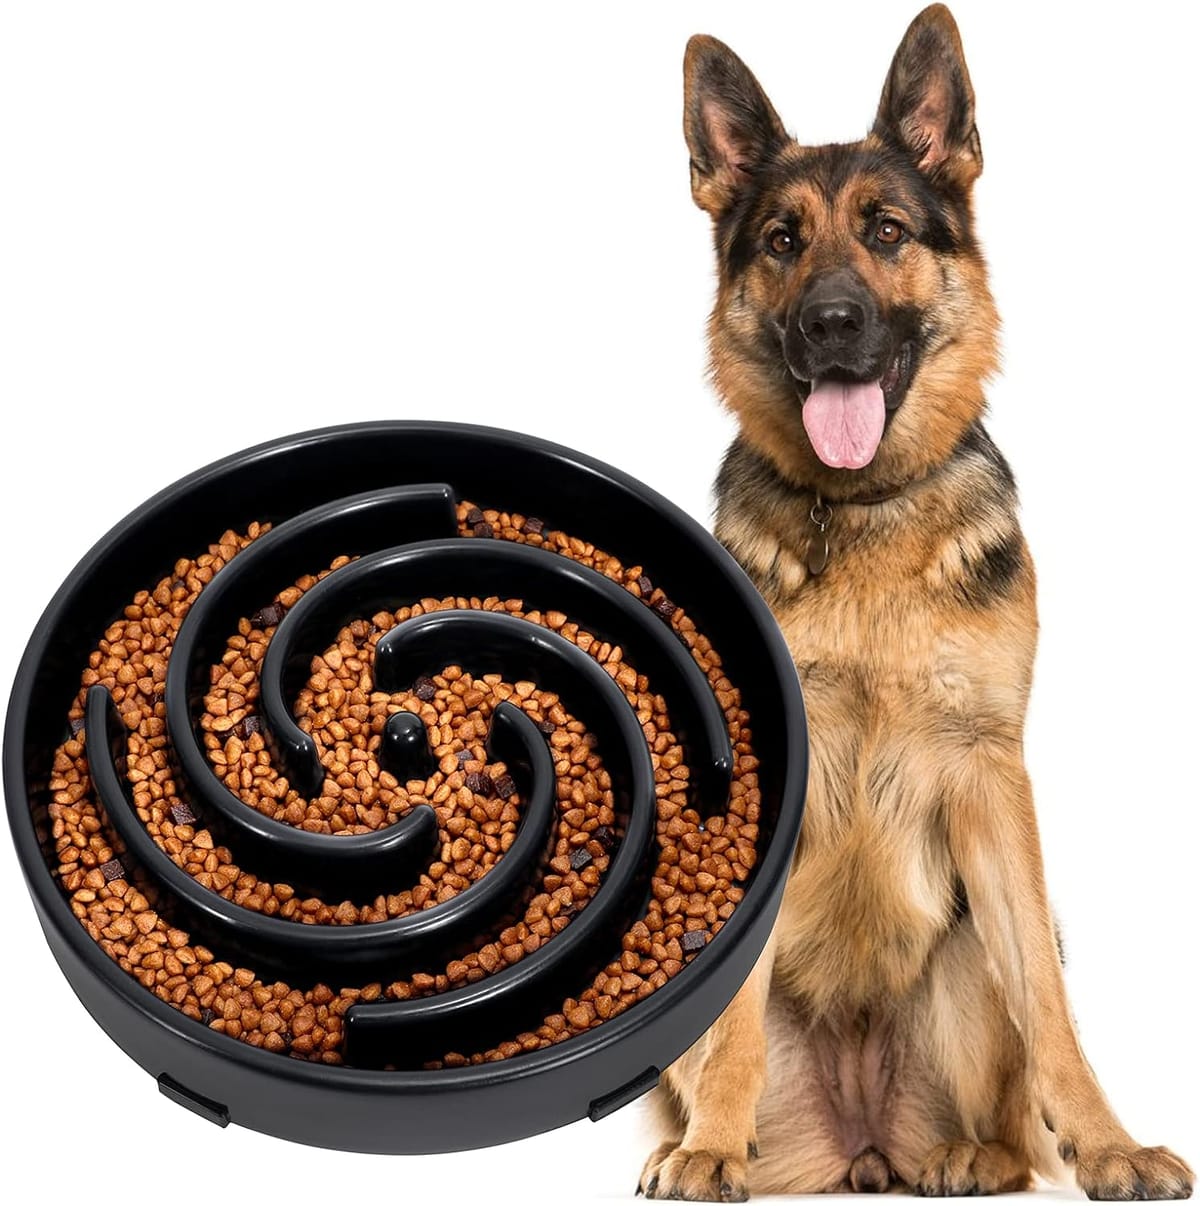 Are Slow Feeders Good for Dogs